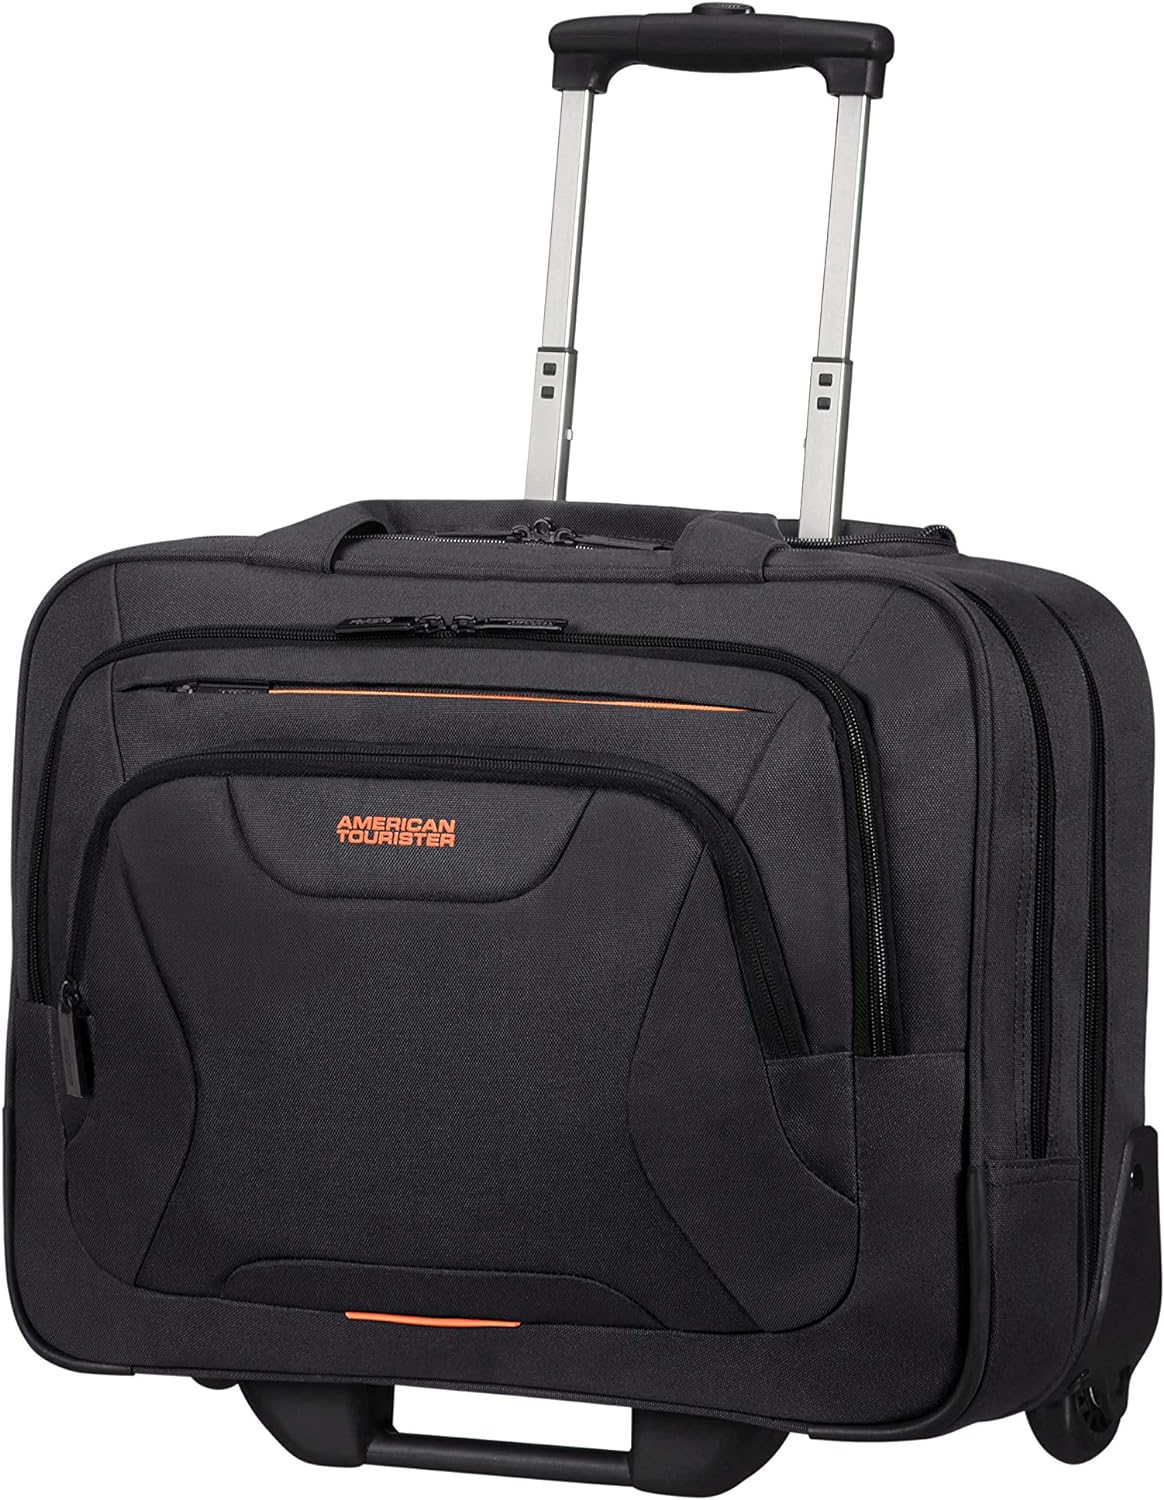 American Tourister at Work Roller Case